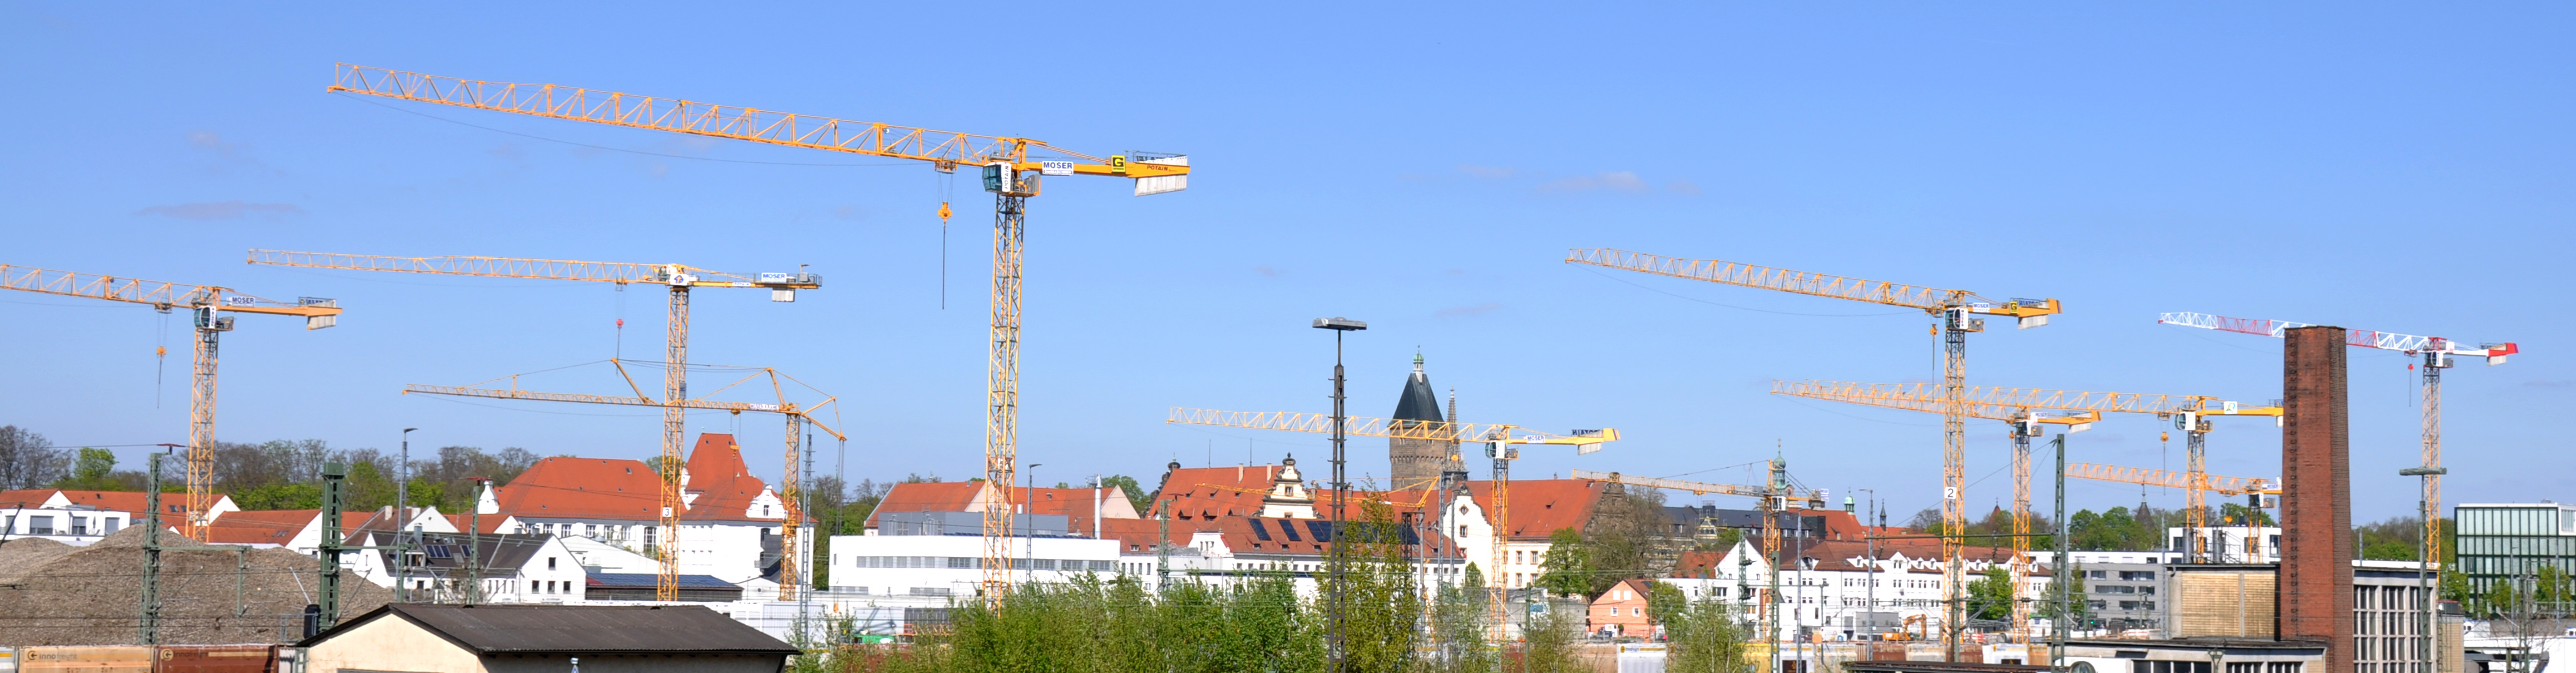 A fleet of 13 Potain tower cranes is helping to build a new residential and commercial district in Regensburg, Germany. The new district, named “Das DÖRNBERG,” is only miles from Regenburg’s historic old town, which has been a UNESCO World Cultural Heritage since 2006.